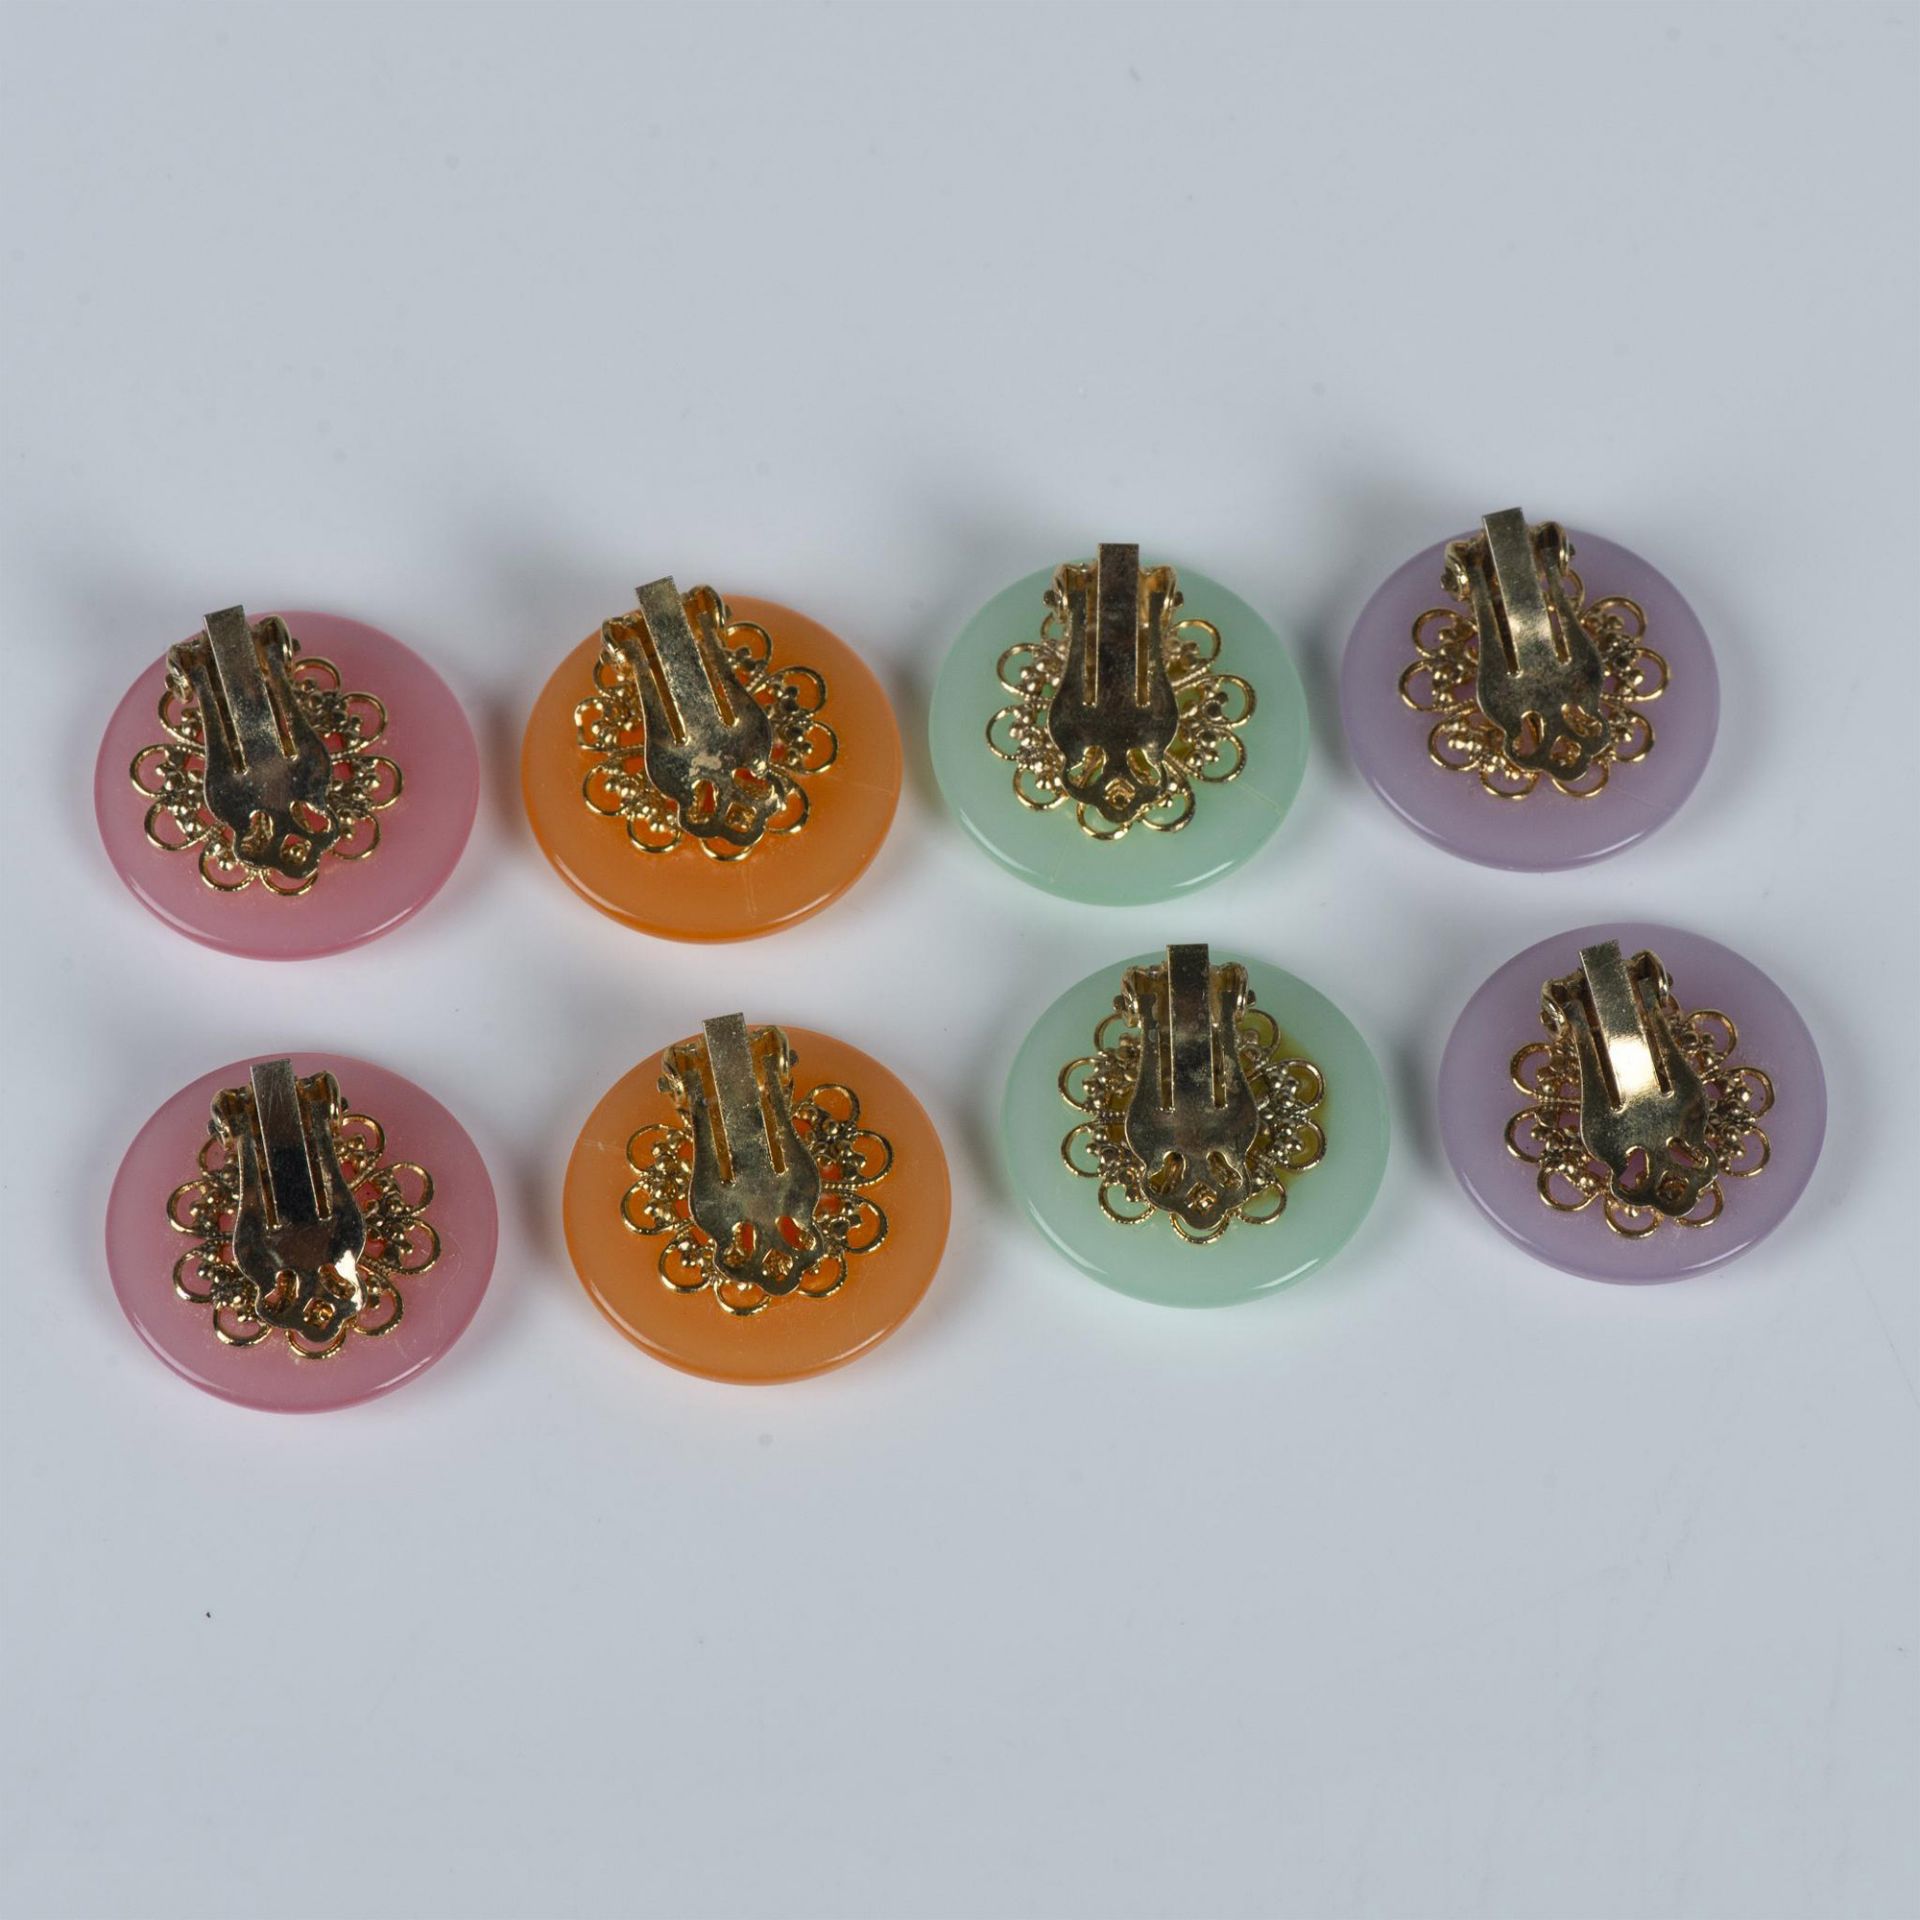 4 Pairs of Pretty Pastel Round Clip-On Earrings - Image 3 of 8